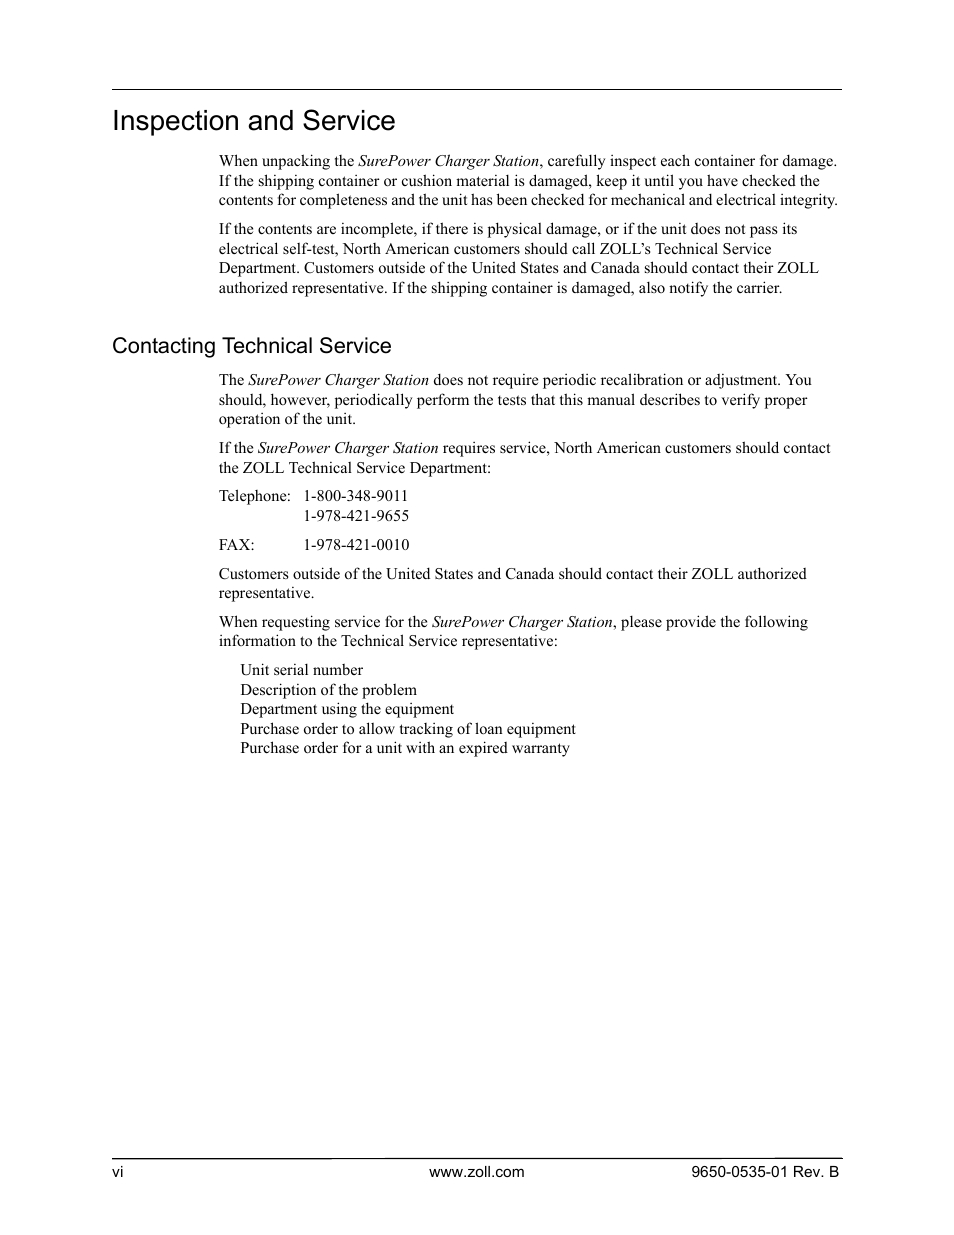 Inspection and service, Contacting technical service | ZOLL SurePower Rev B Charger Station User Manual | Page 10 / 44